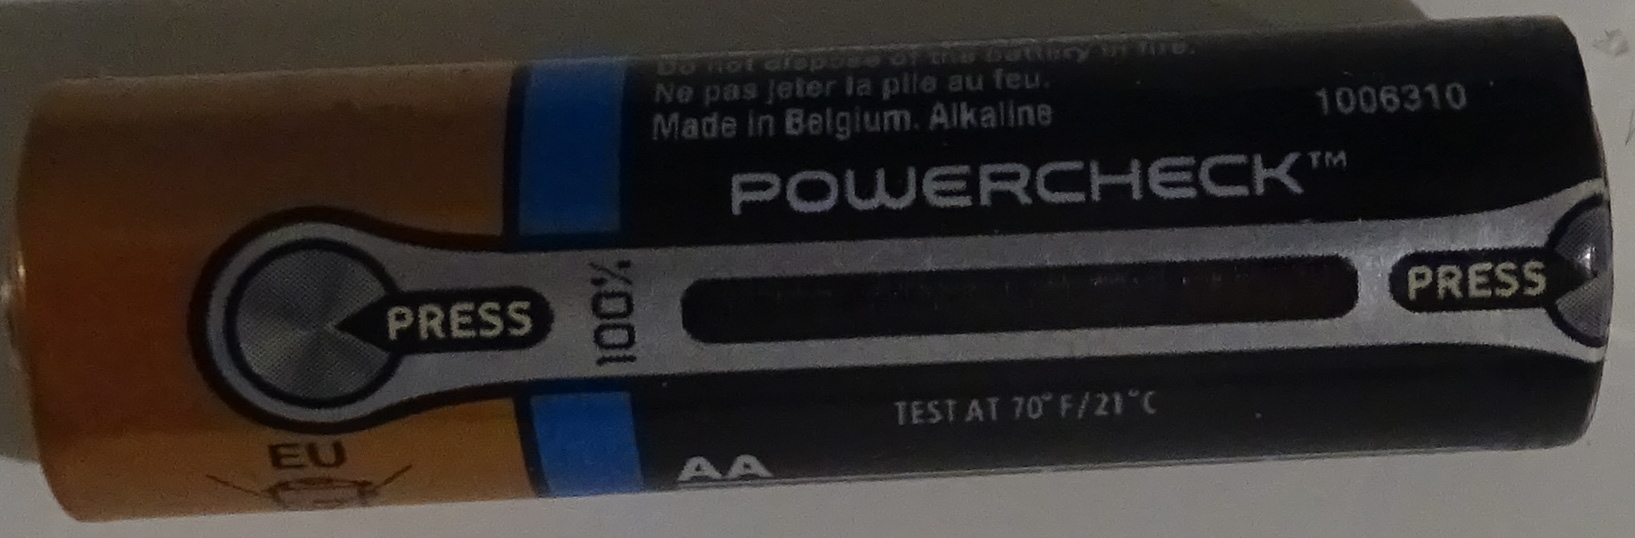 Picture of a Duracell Powercheck